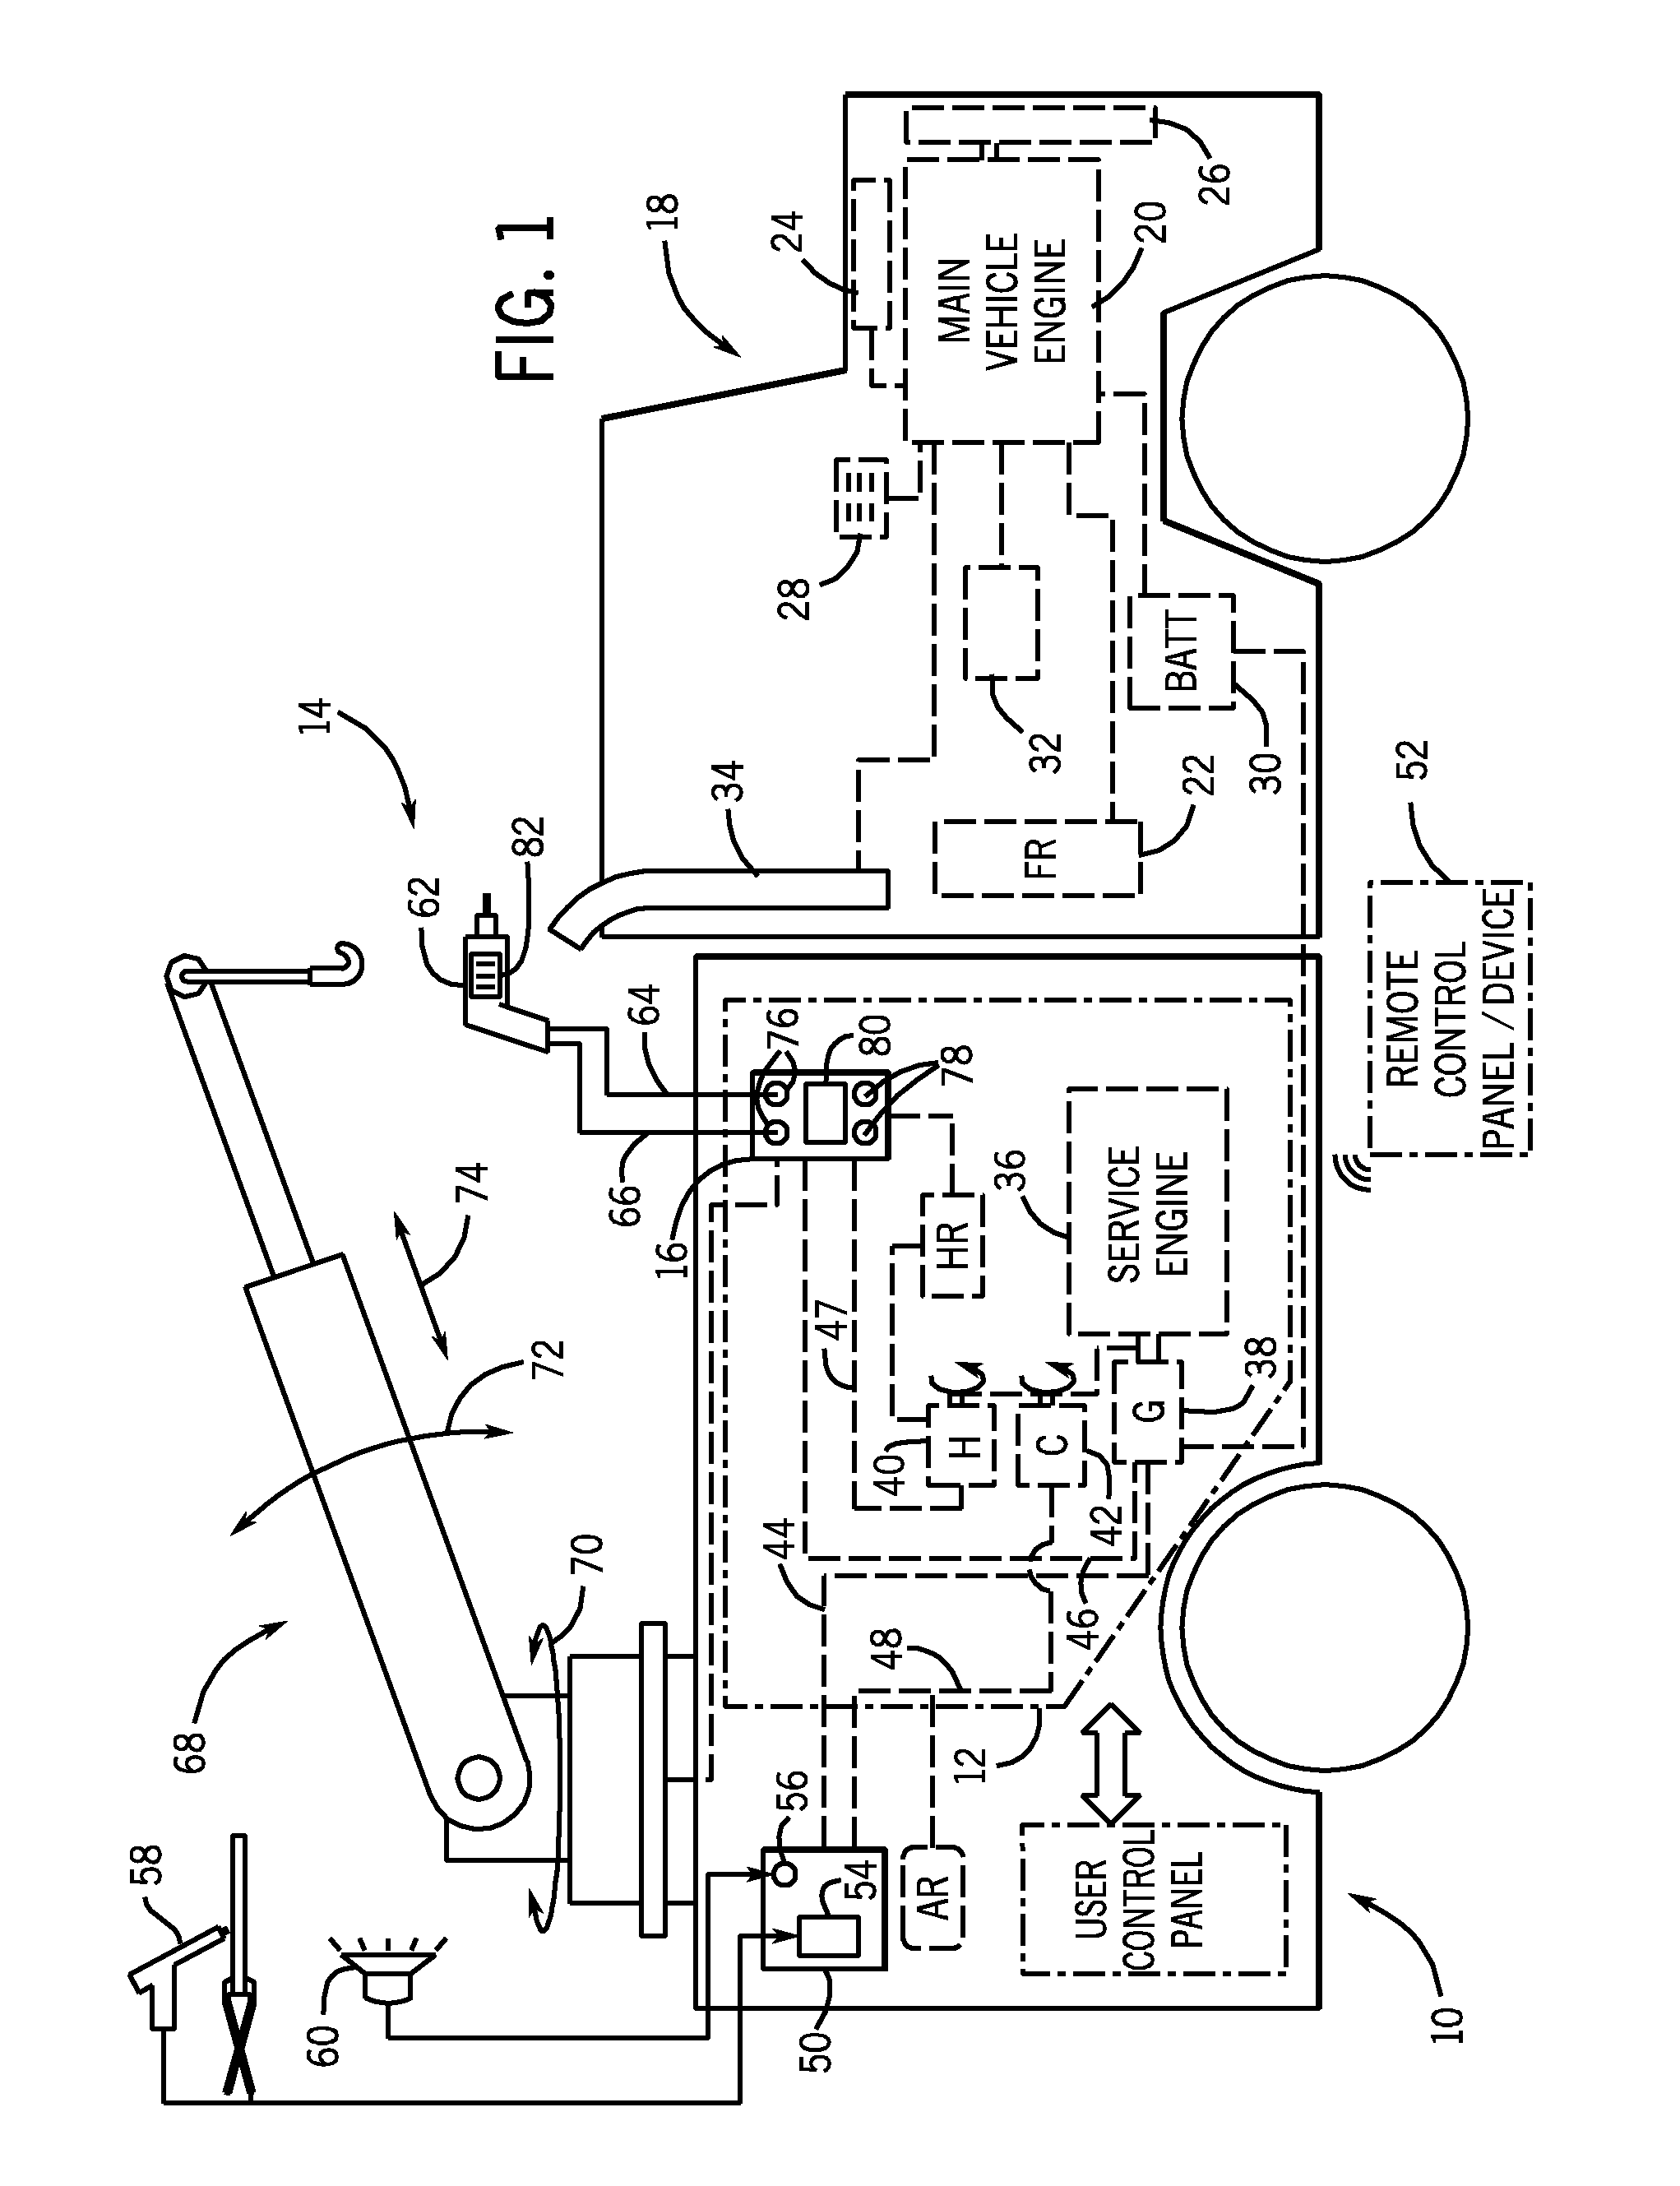 Hydraulic tool control with electronically adjustable flow